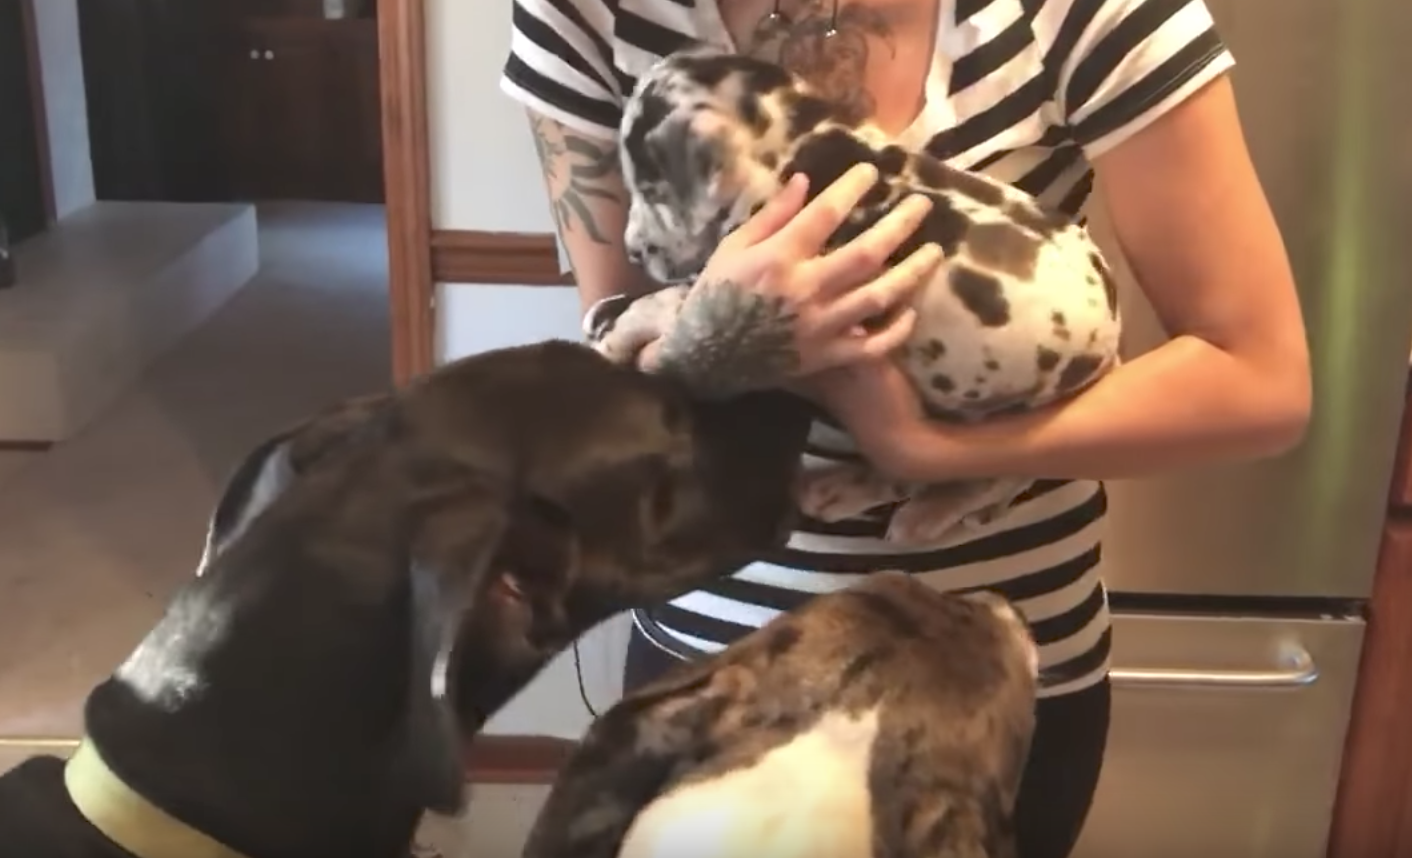 Mom Introduces The New Pup To The Dogs, But The Great Dane ...